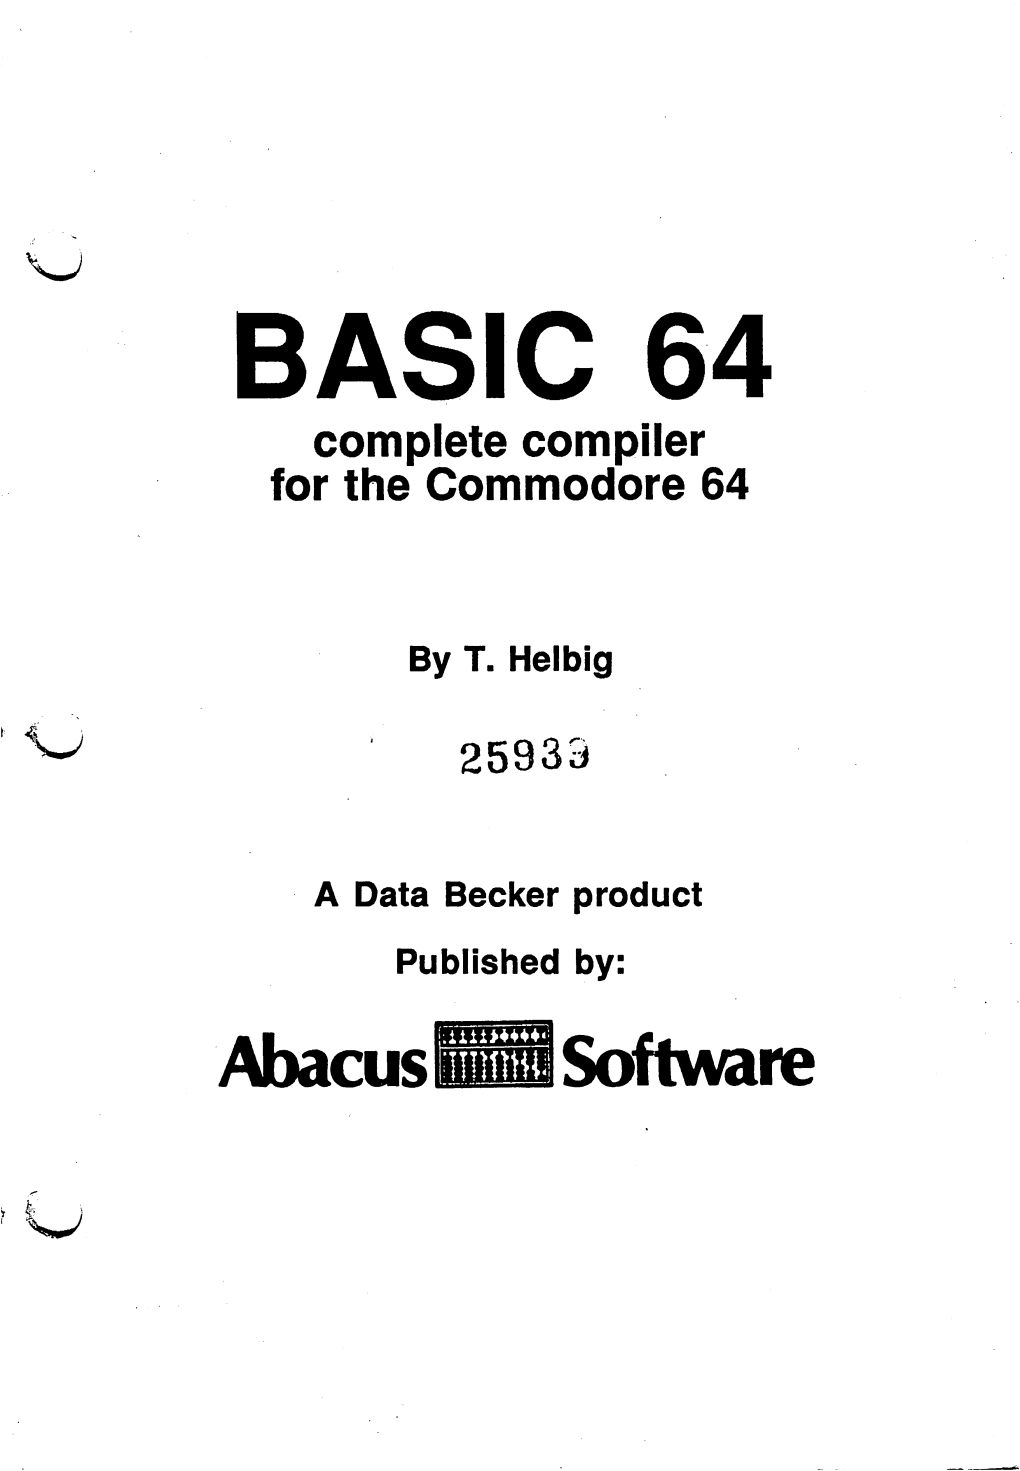 BASIC 64 Complete Compiler for the Commodore 64